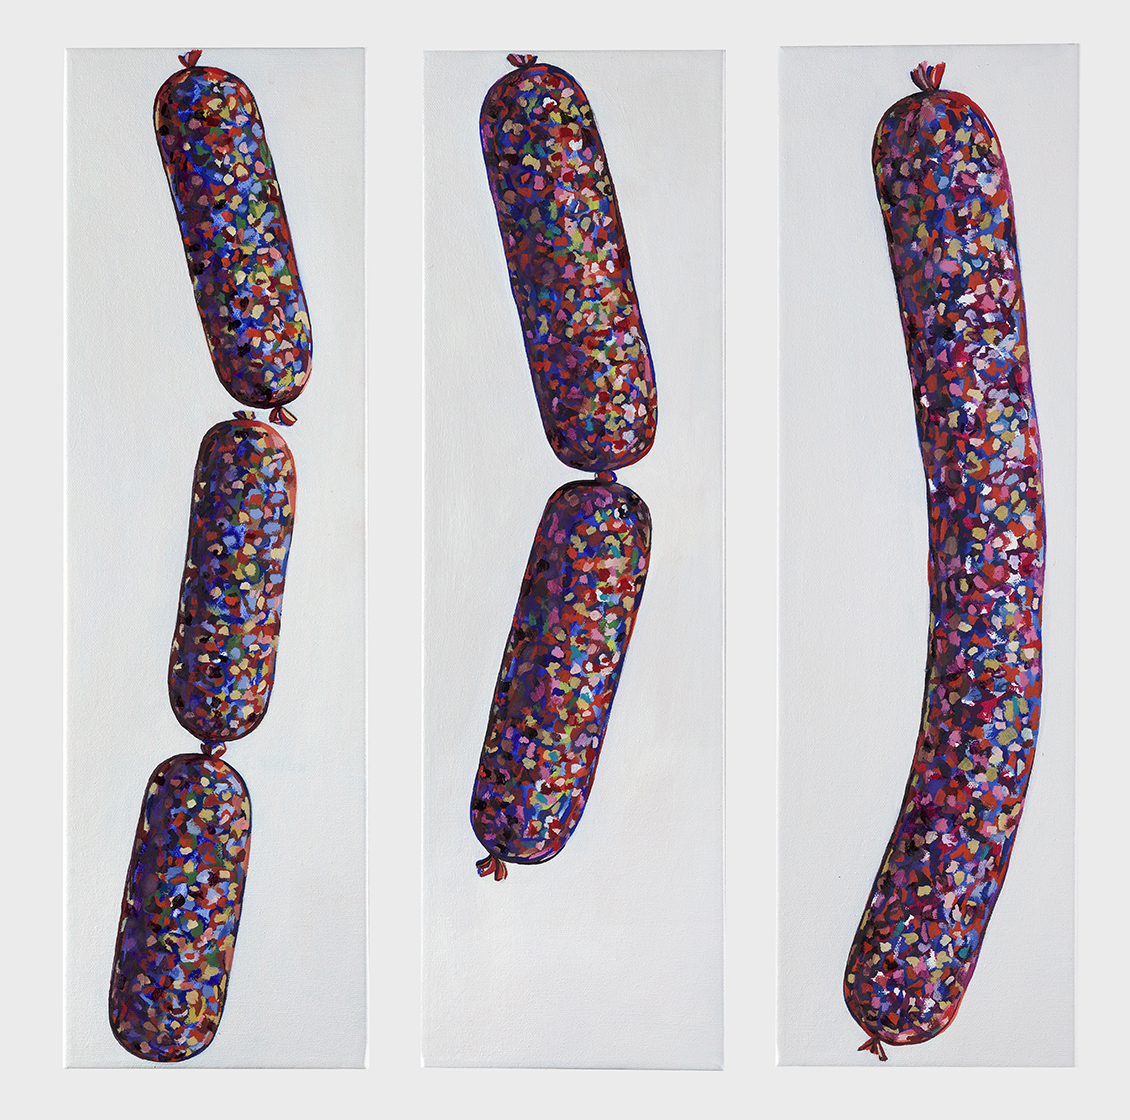   Untitled,&nbsp;Sausages 1, 2, 3,&nbsp; 2016  Oil on canvas  each 6 x 20 inches    